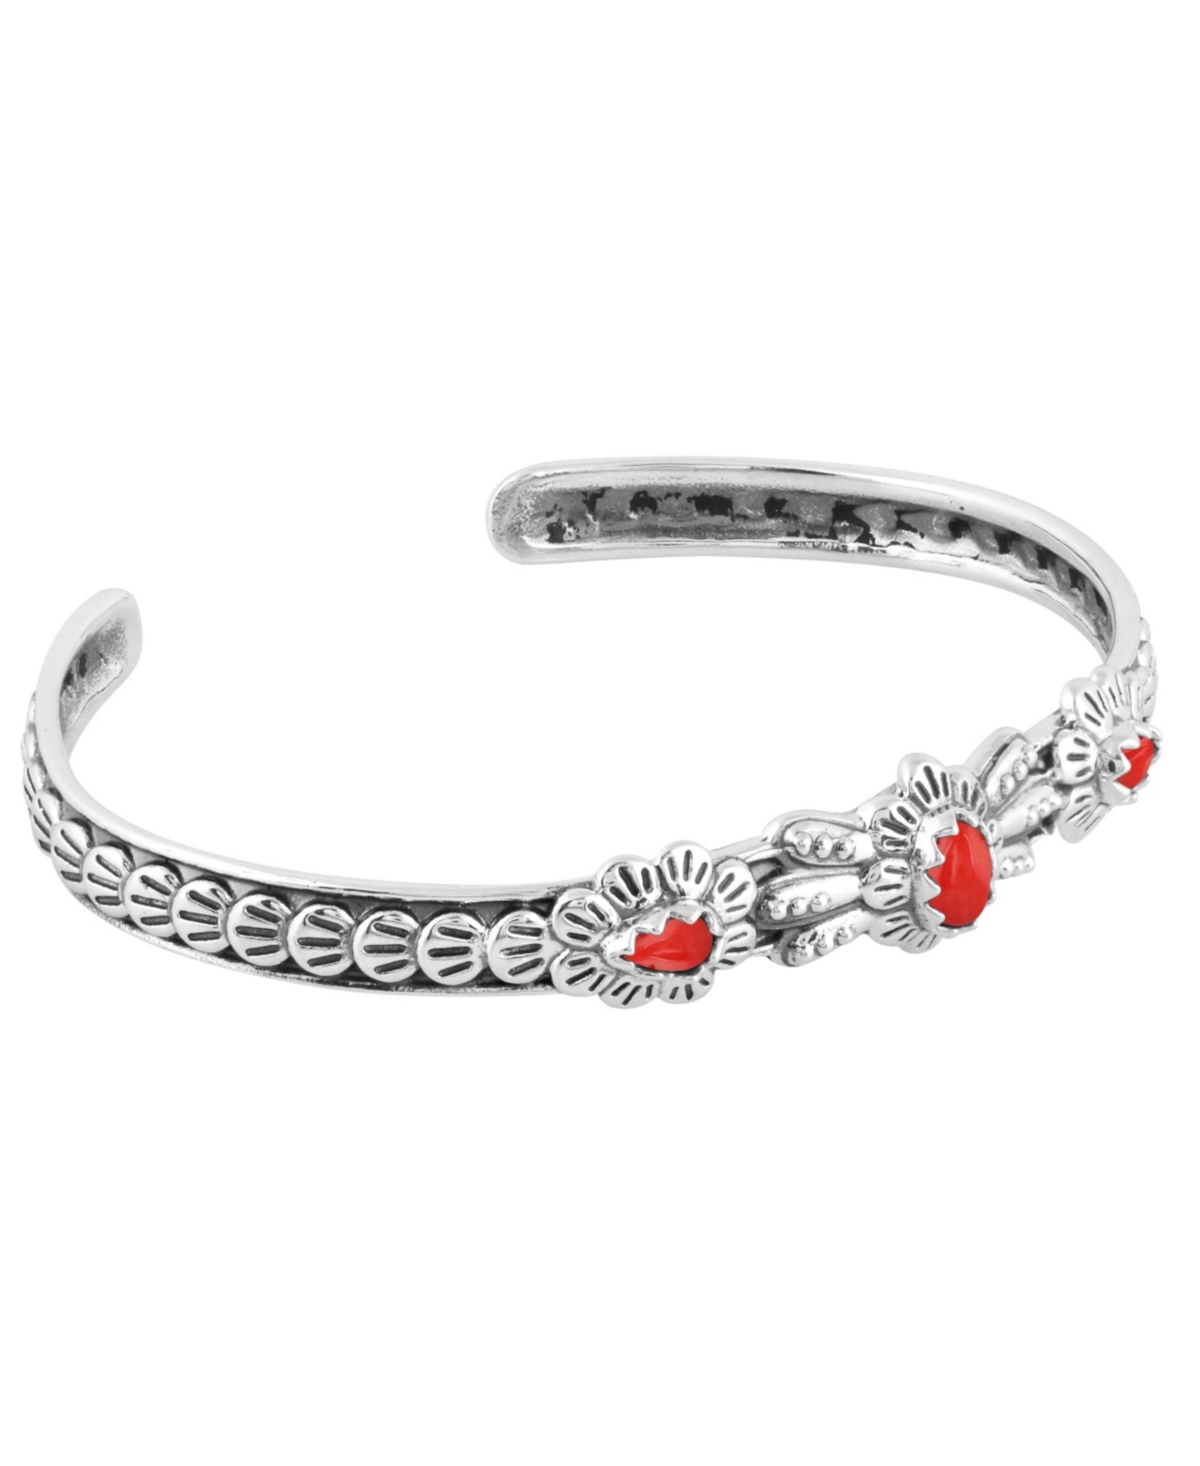 Sterling Silver Women's Cuff Bracelet Coral Gemstone Flower Concha Design Size Small - Large - Red coral